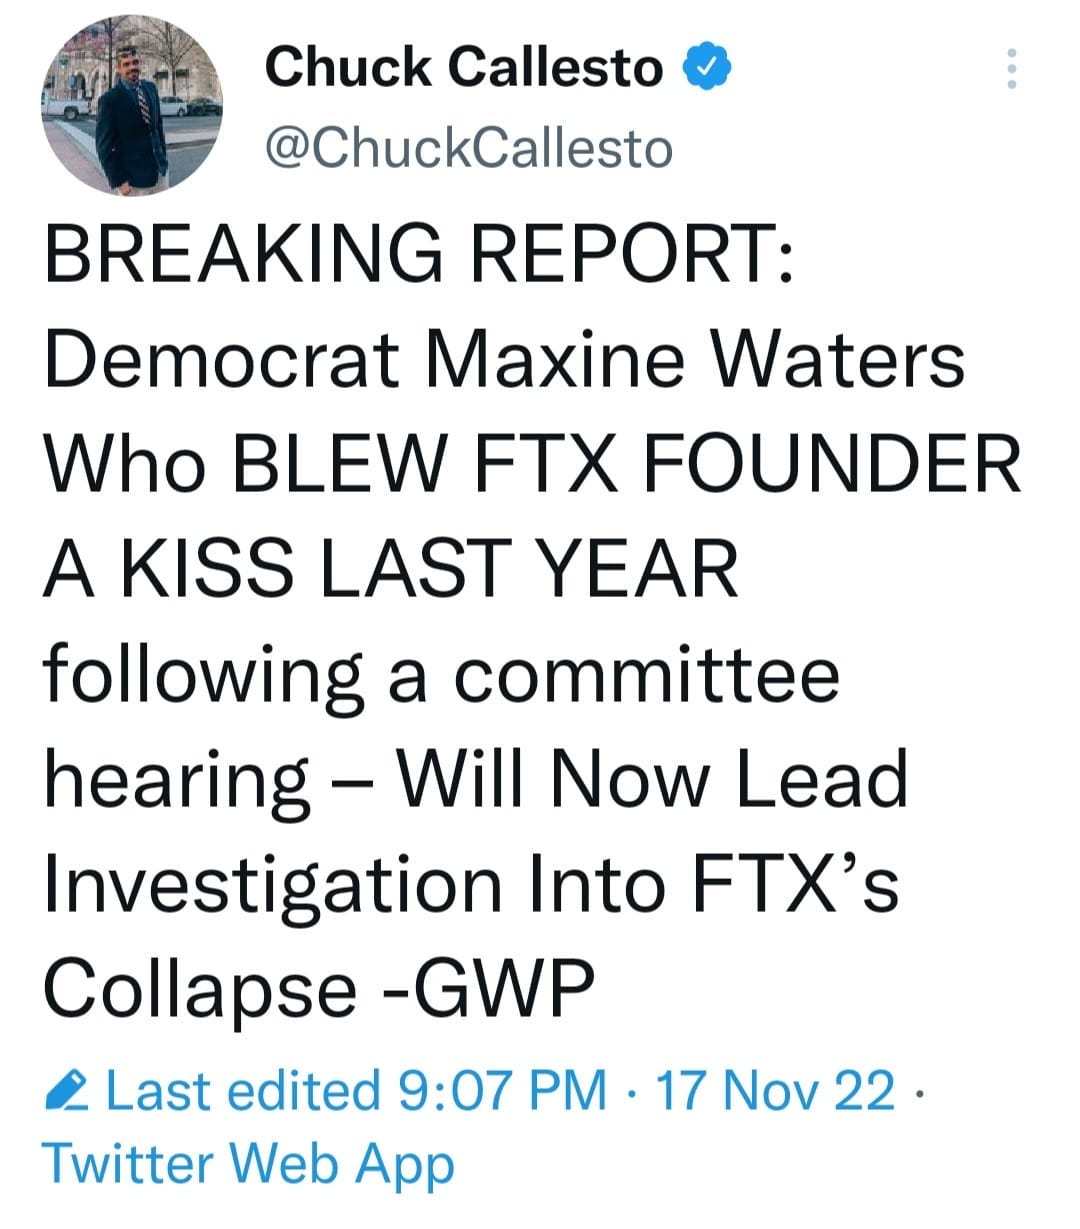 May be a Twitter screenshot of 1 person and text that says 'Chuck Callesto @ChuckCallesto BREAKING REPORT: Democrat Maxine Waters Who BLEW FTX FOUNDER A KISS LAST YEAR following a committee hearing Will Now Lead Investigation Into FTX's Collapse -GWP 2 Last edited 9:07 PM 17 Nov 22. Twitter Web App'